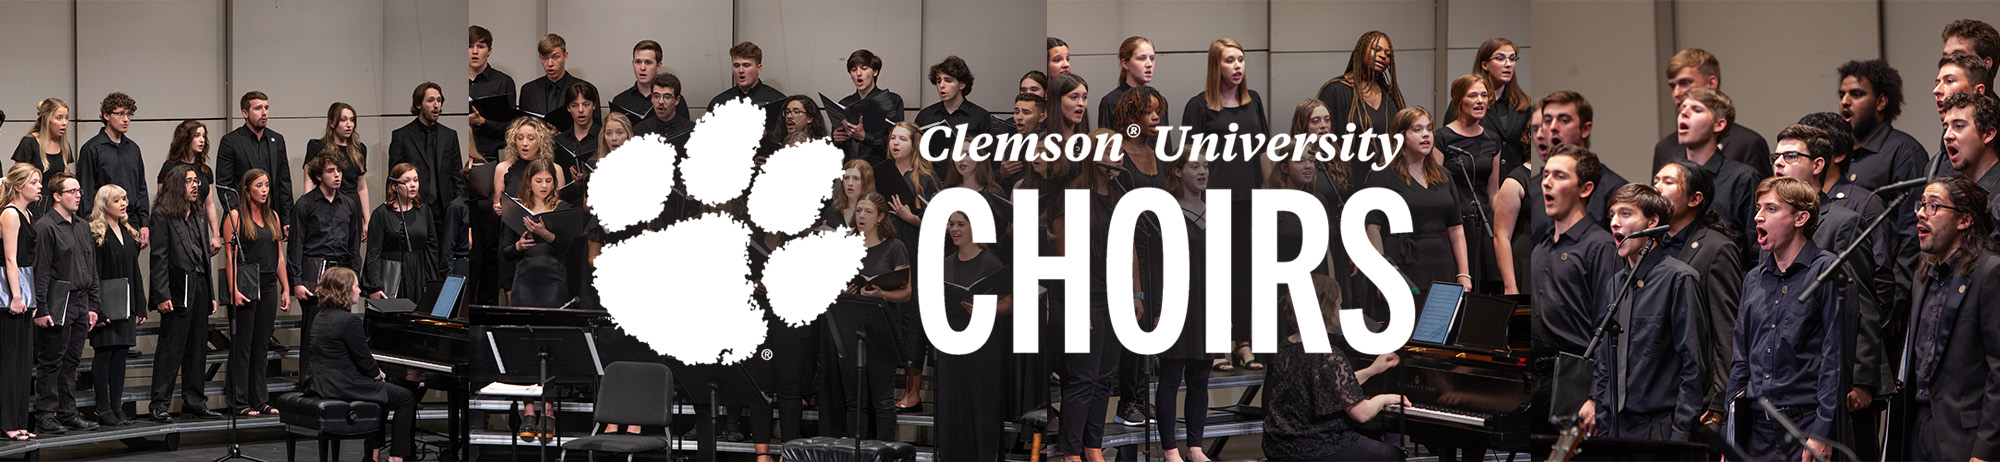 Images of Clemson Choirs performing behind a tiger paw and the words Clemson University Choirs'